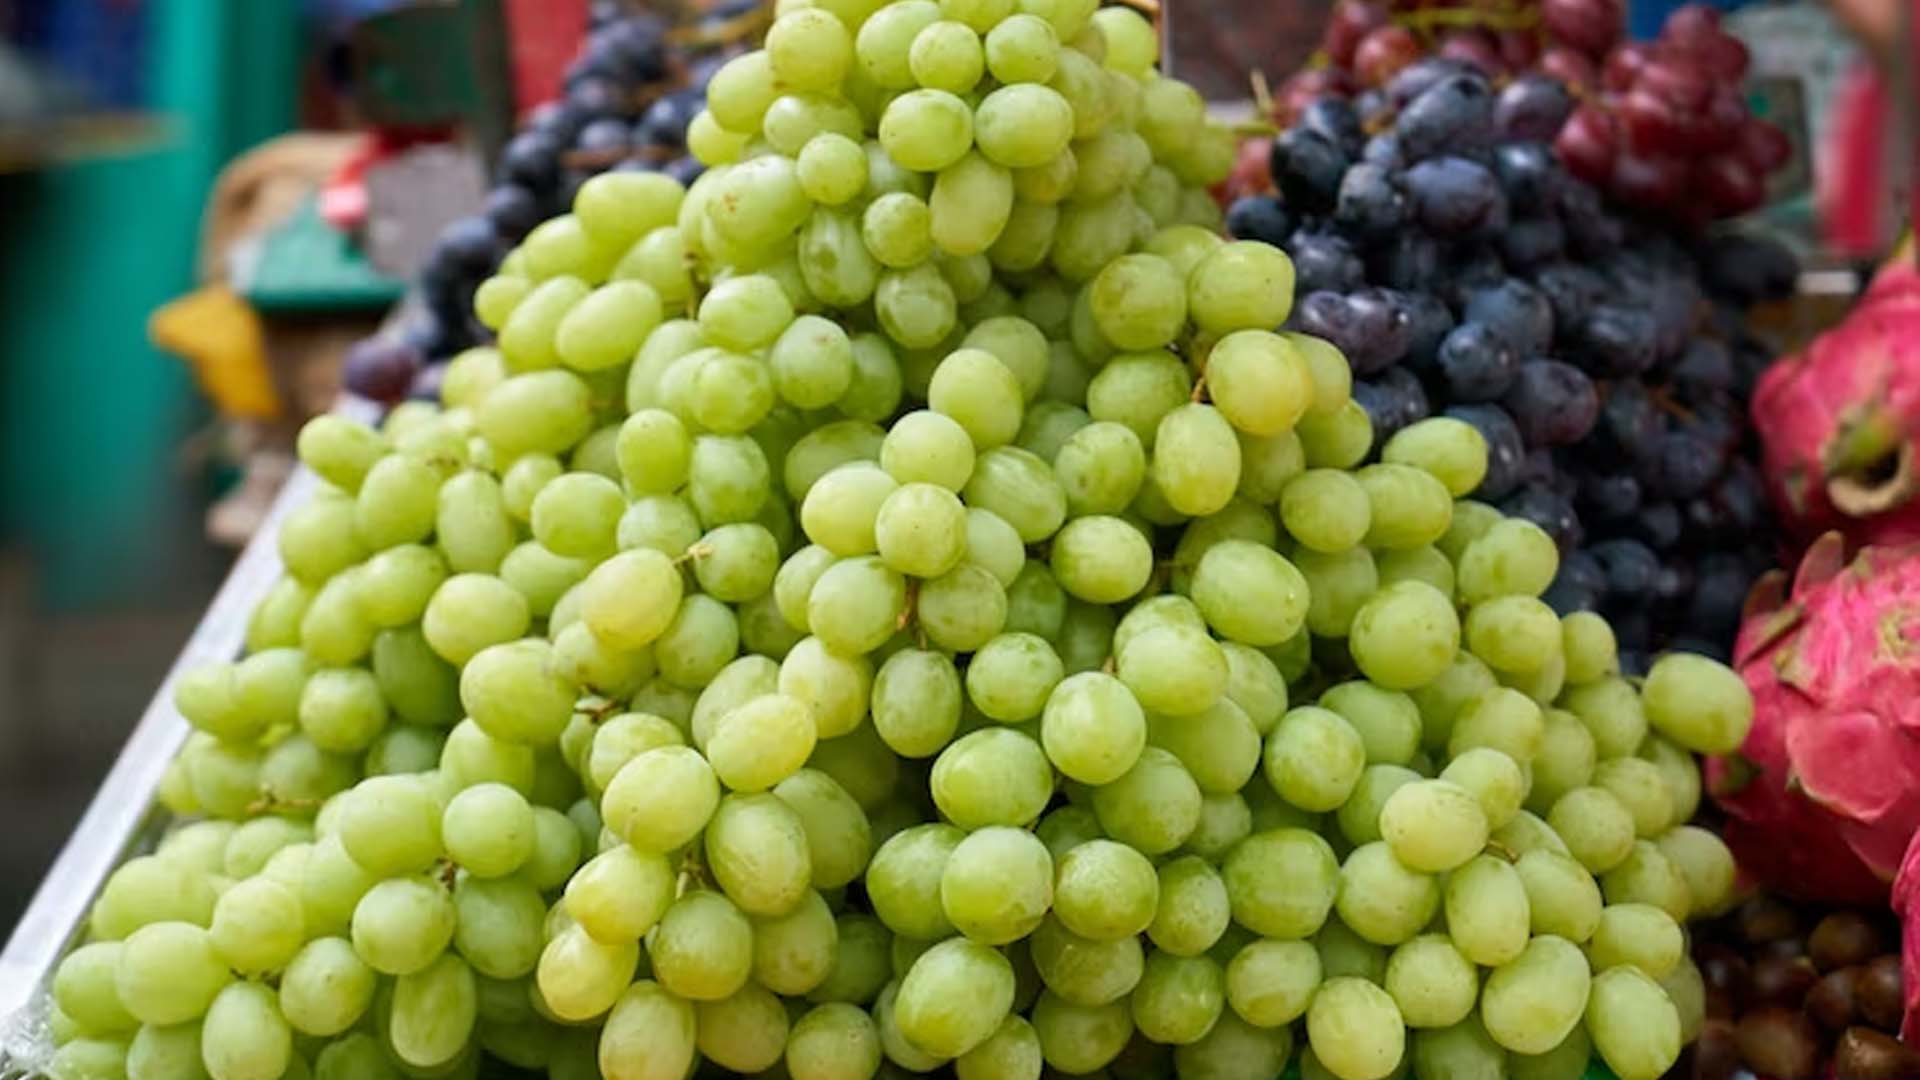 Nutrition Facts of Grapes